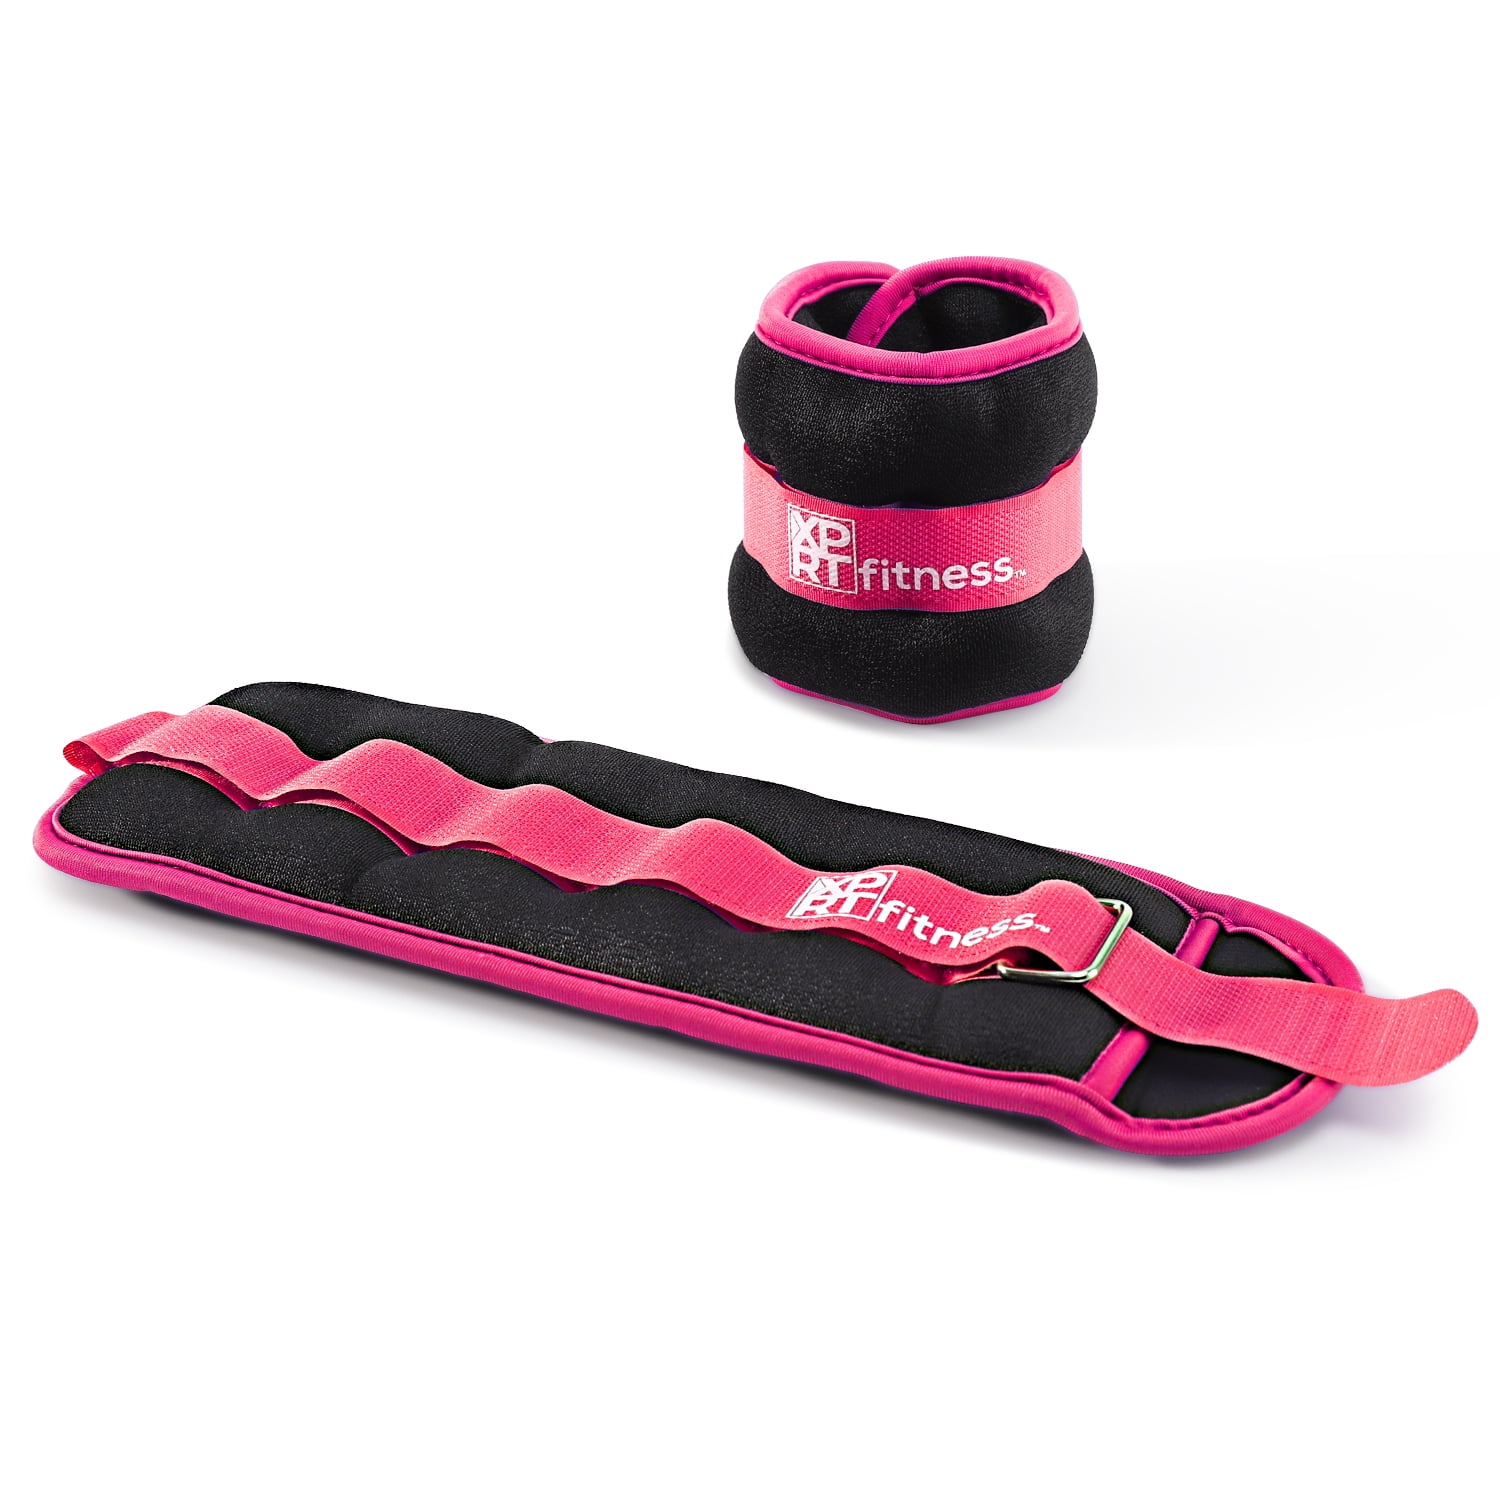 1 Pair FLO360 Fitness Ankle/Wrist Weights with Adjustable Strap 5lb Pink 